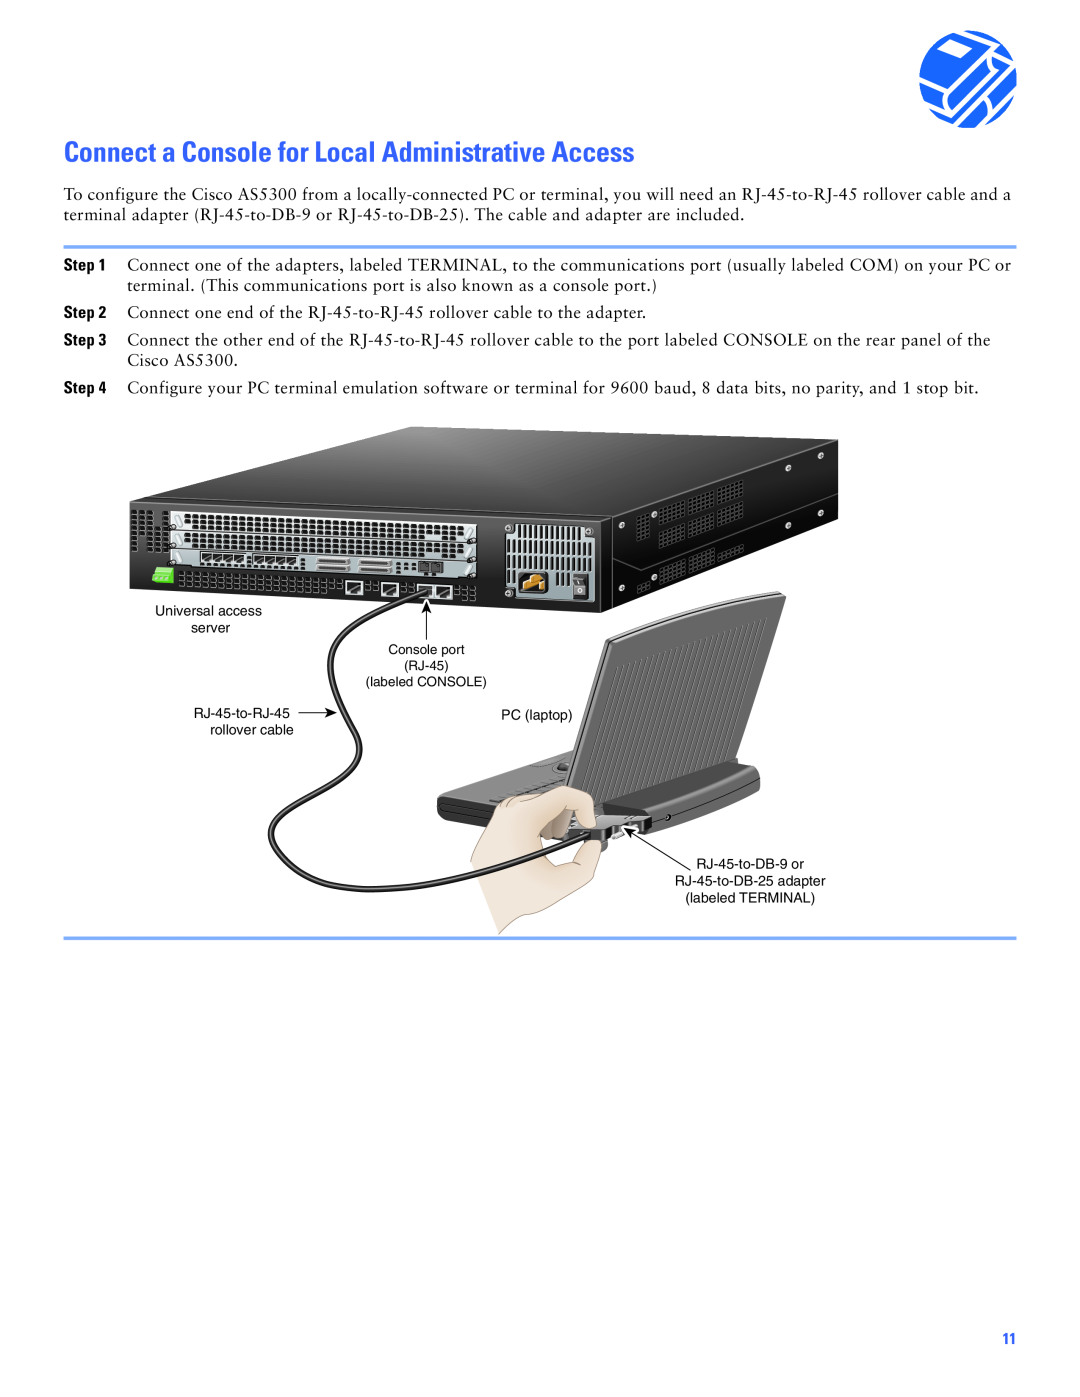 Cisco Systems Cisco AS5300 Connect a Console for Local Administrative Access, Universal access server, RJ-45-to-RJ-45 